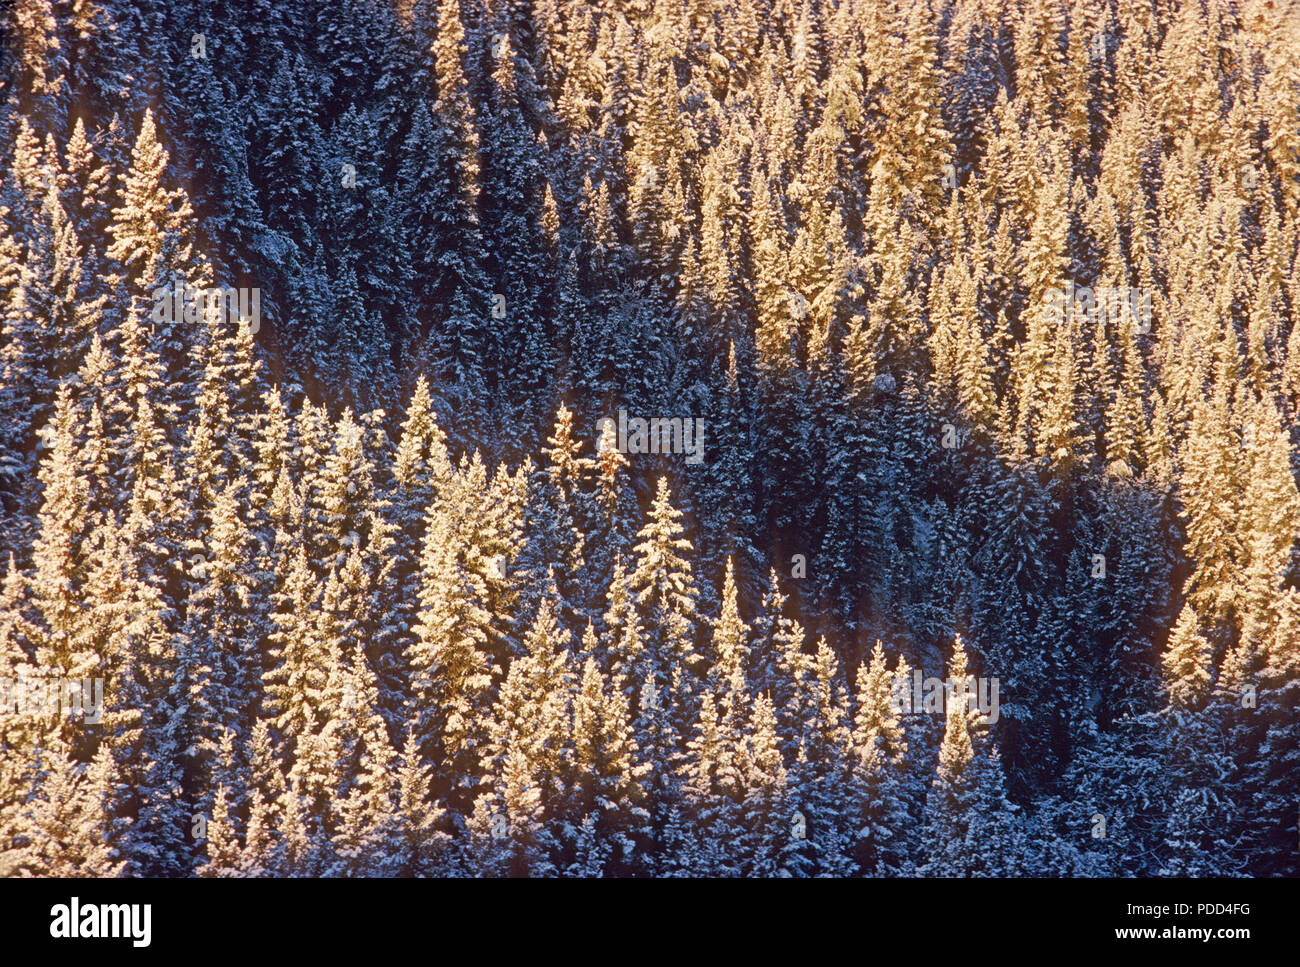 Taiga, boreal forest, coniferous evergreen forest. White spruce, Picea glauca, trees with snow, Alberta Stock Photo